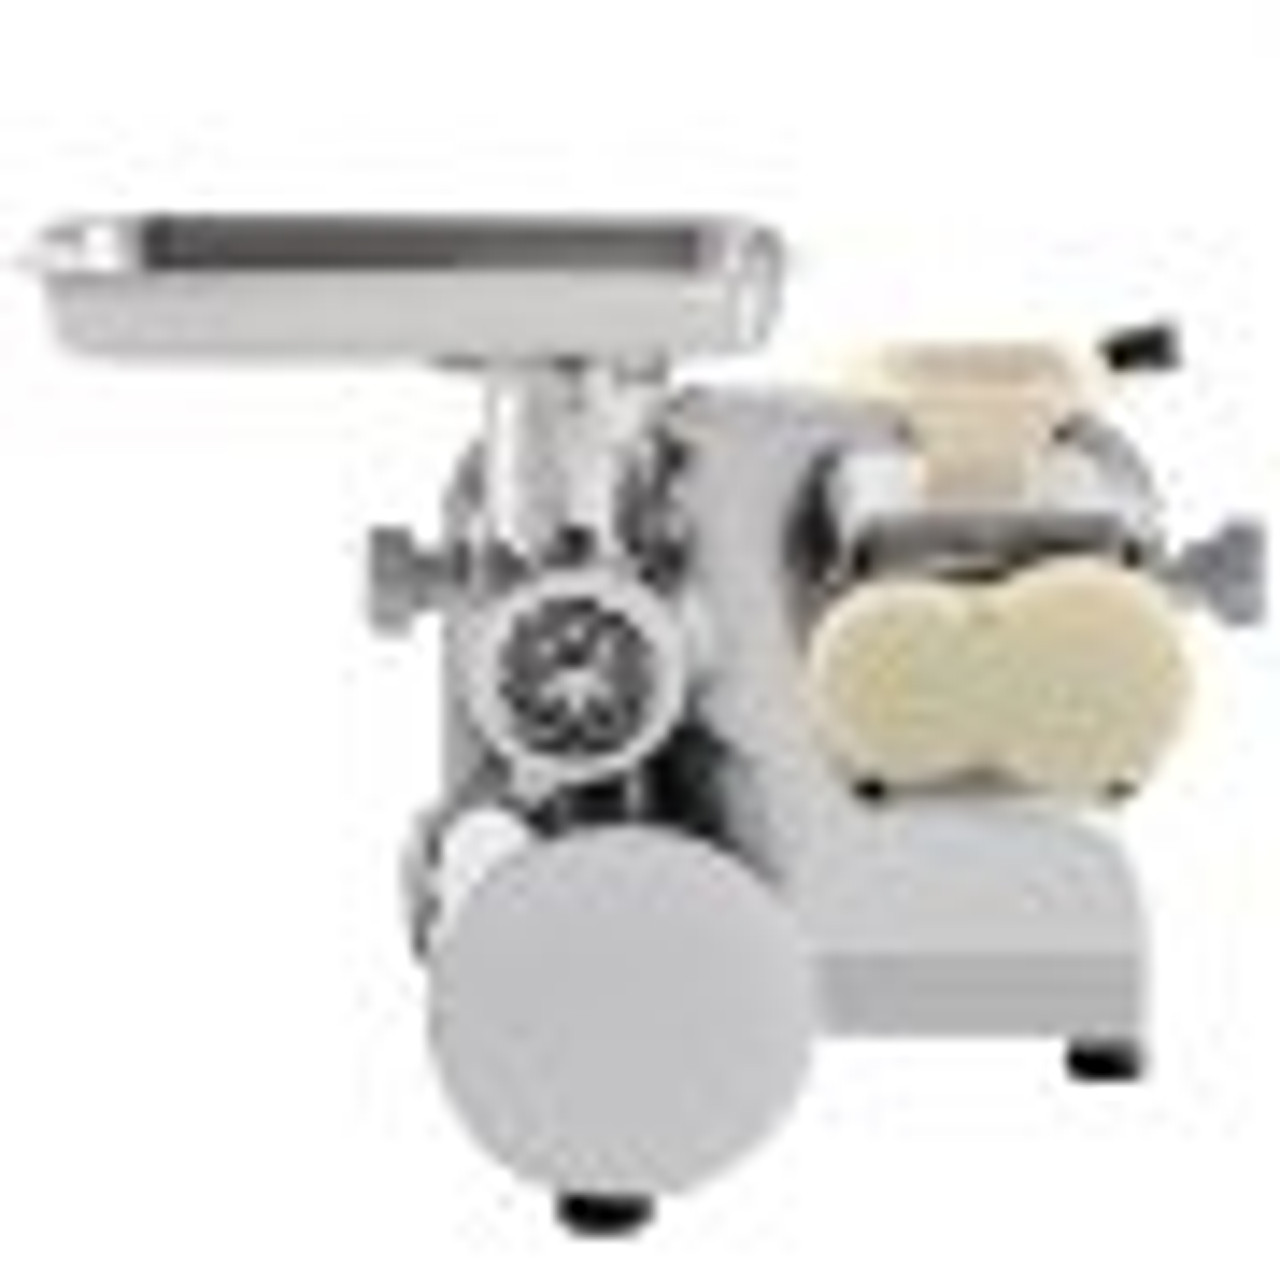 3 in 1 Electric 500LB/H Commercial Slicer 110V Stainless Steel 1100w Cutter Machine Heavy Duty Sausage Maker Grinder Meat Mincer, 12.6" 13.3" 12.6" inch, Silver